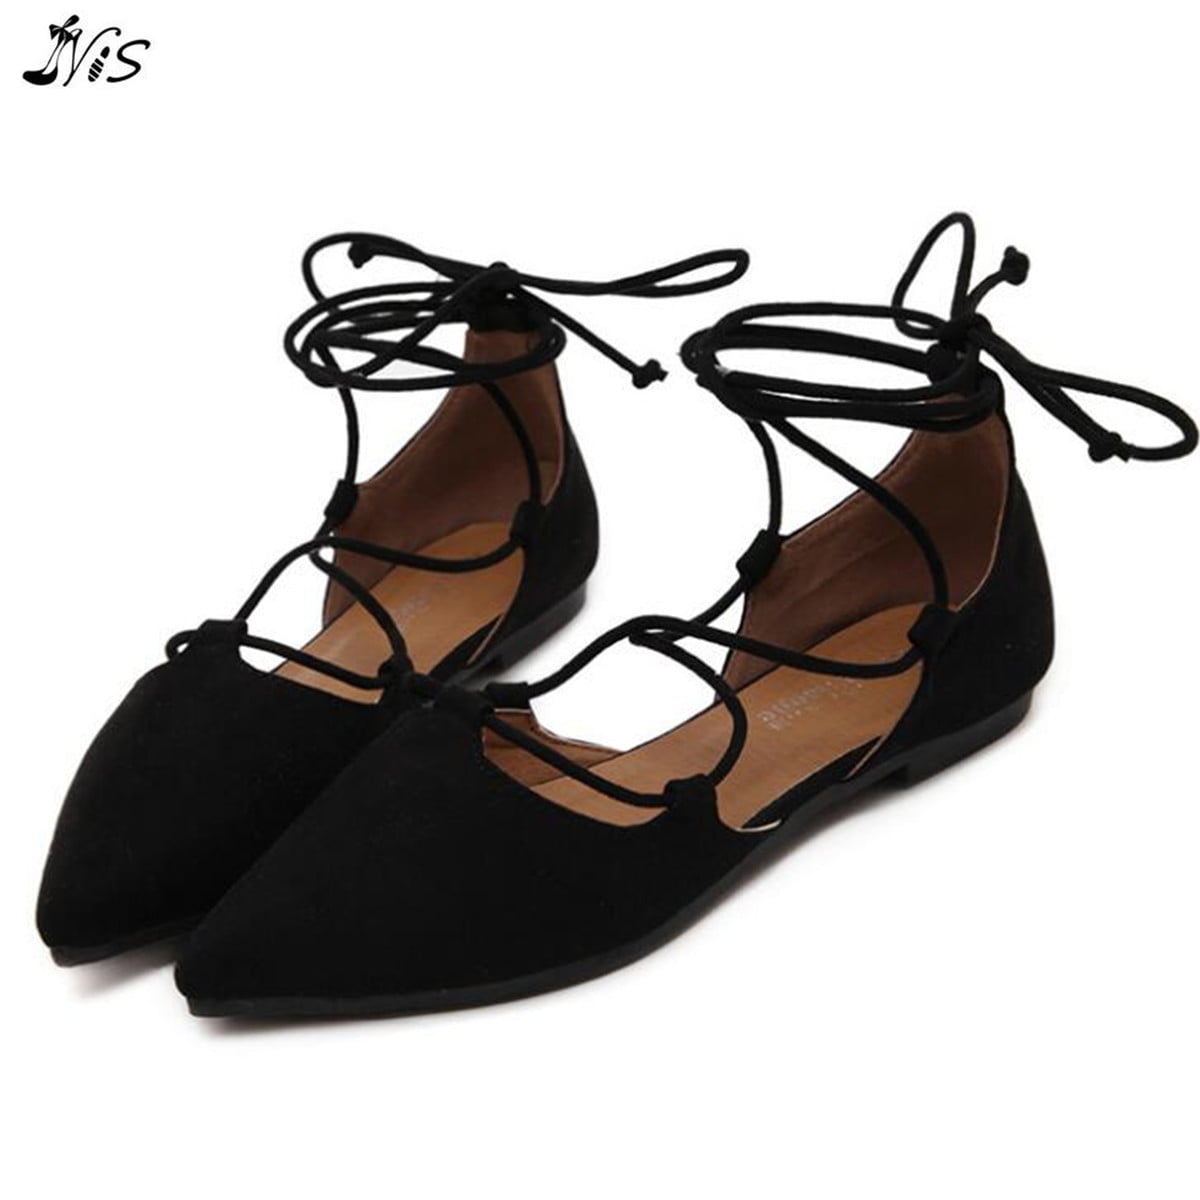 Nis - NIS Women's Ballet Straps Lace Up Flats Suede Pointy Toe Shoes ...